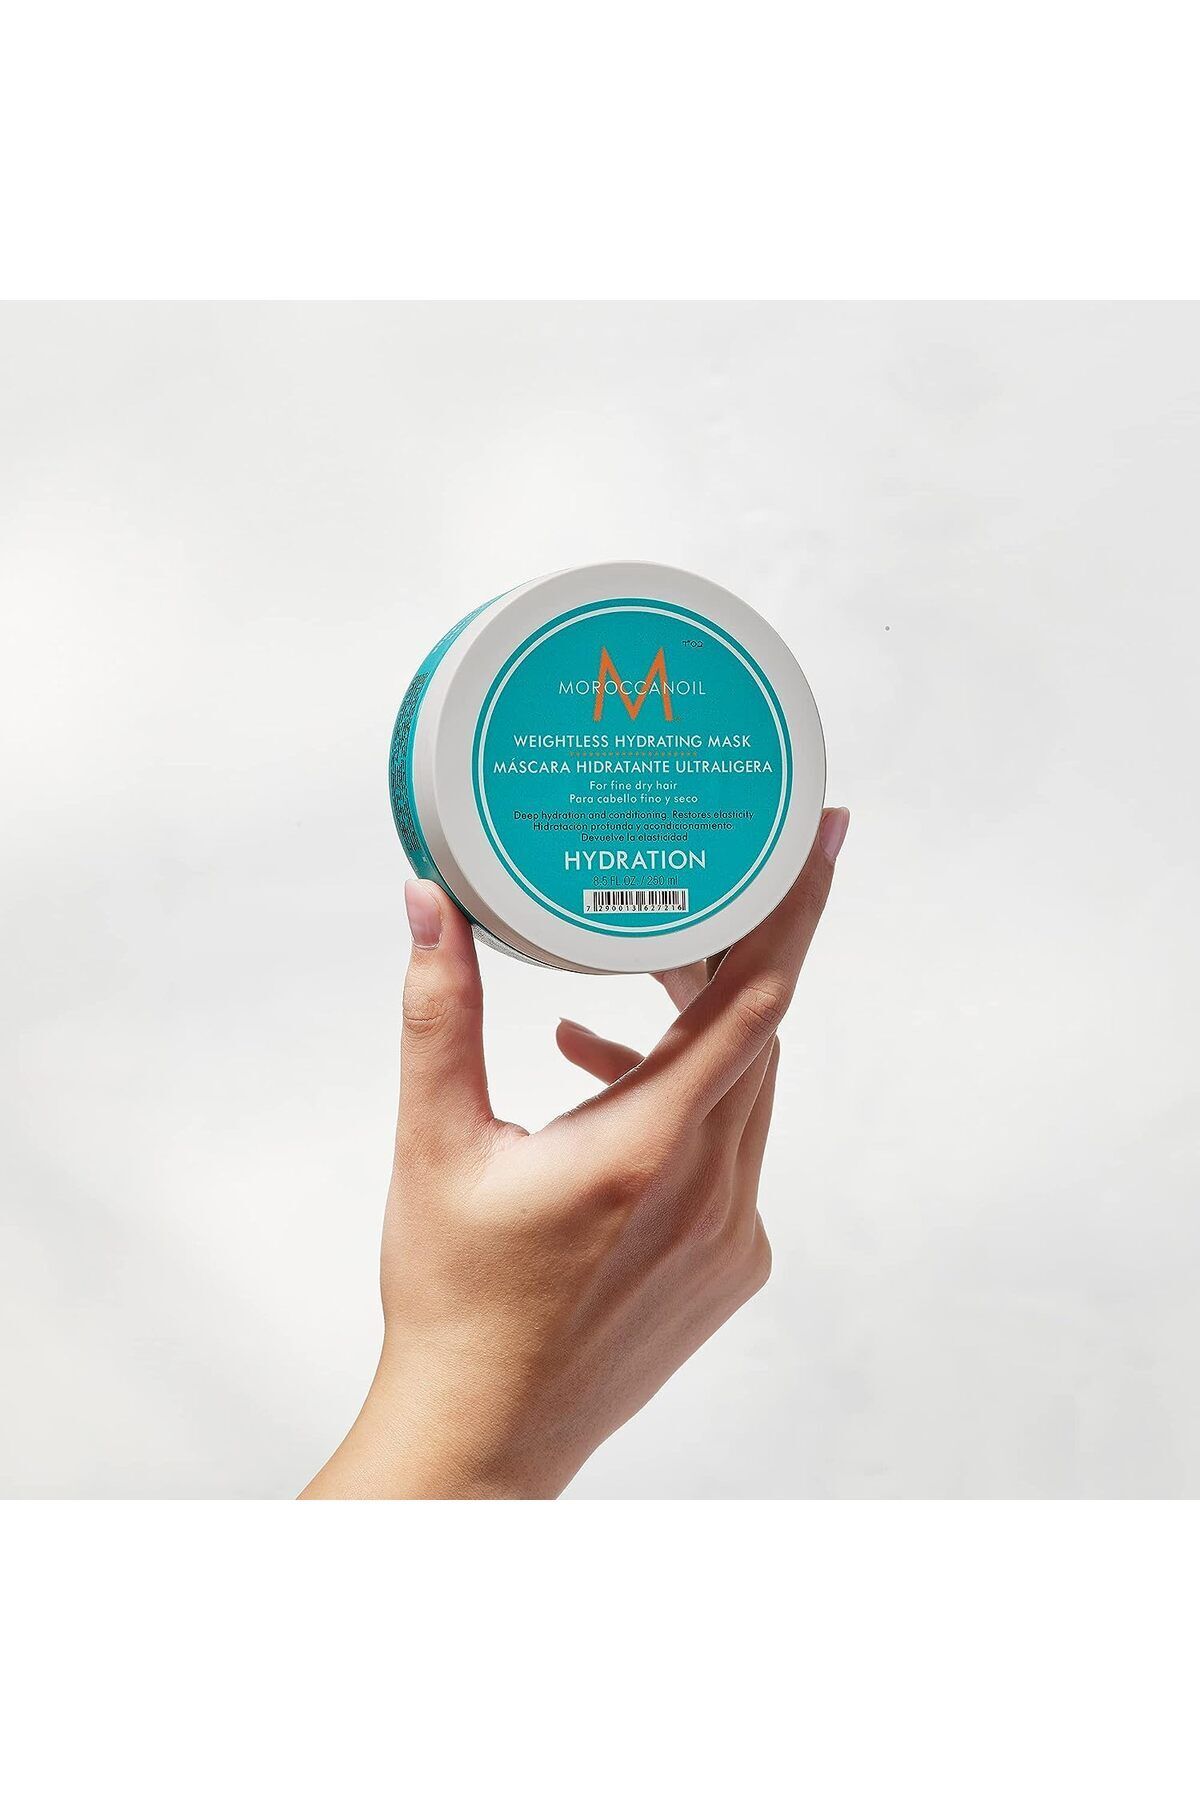 Moroccanoil Weightless Hydrating Mask Deep Care Mask 250ml Trustys.Y140